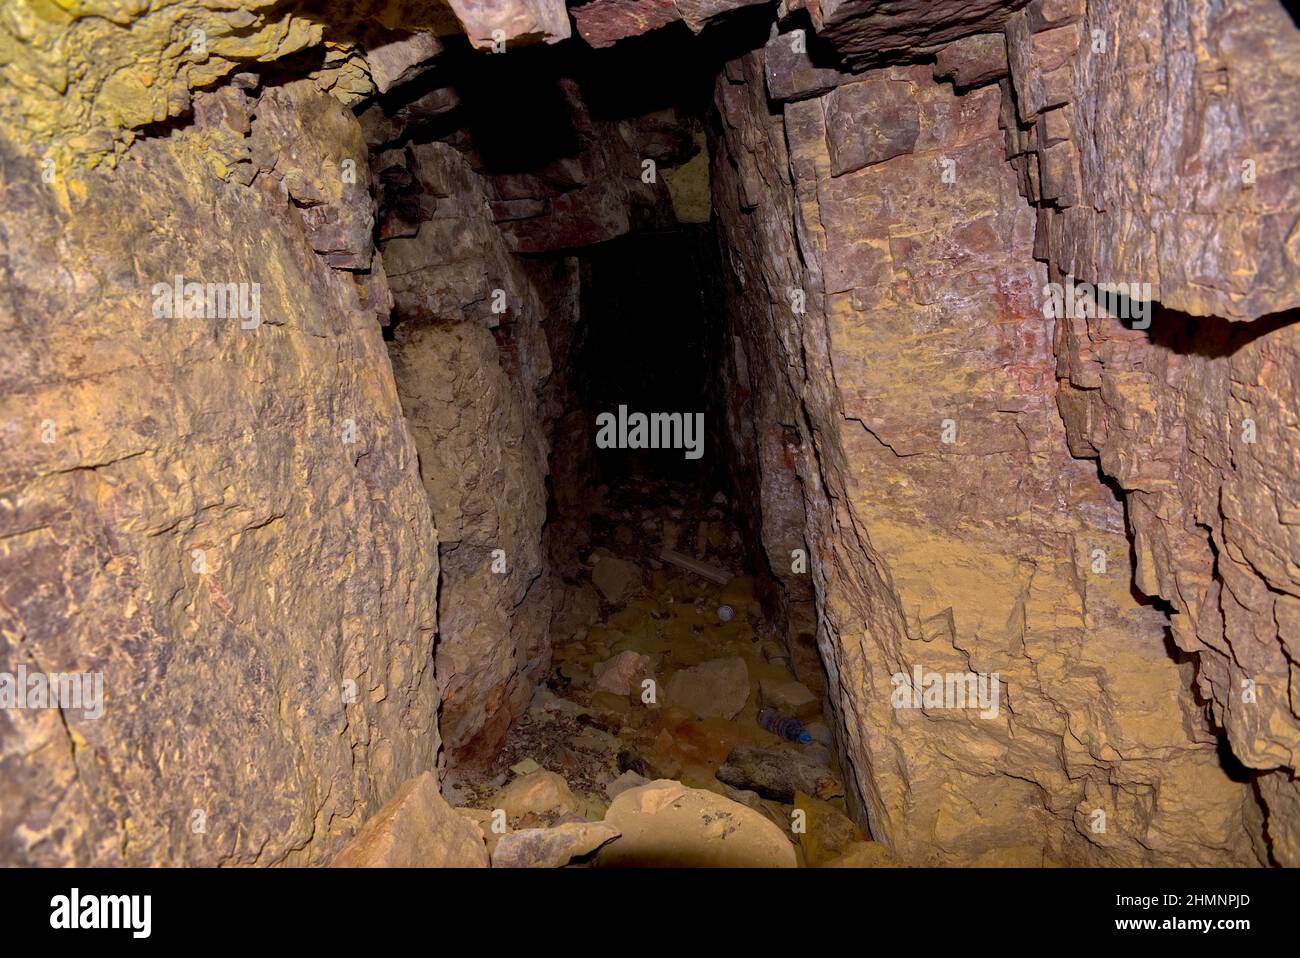 Abandoned to the Darkness. An abandoned mineshaft in the side of Sullivan Butte in Chino Valley AZ. For safety reasons I did not fully explore the min Stock Photo